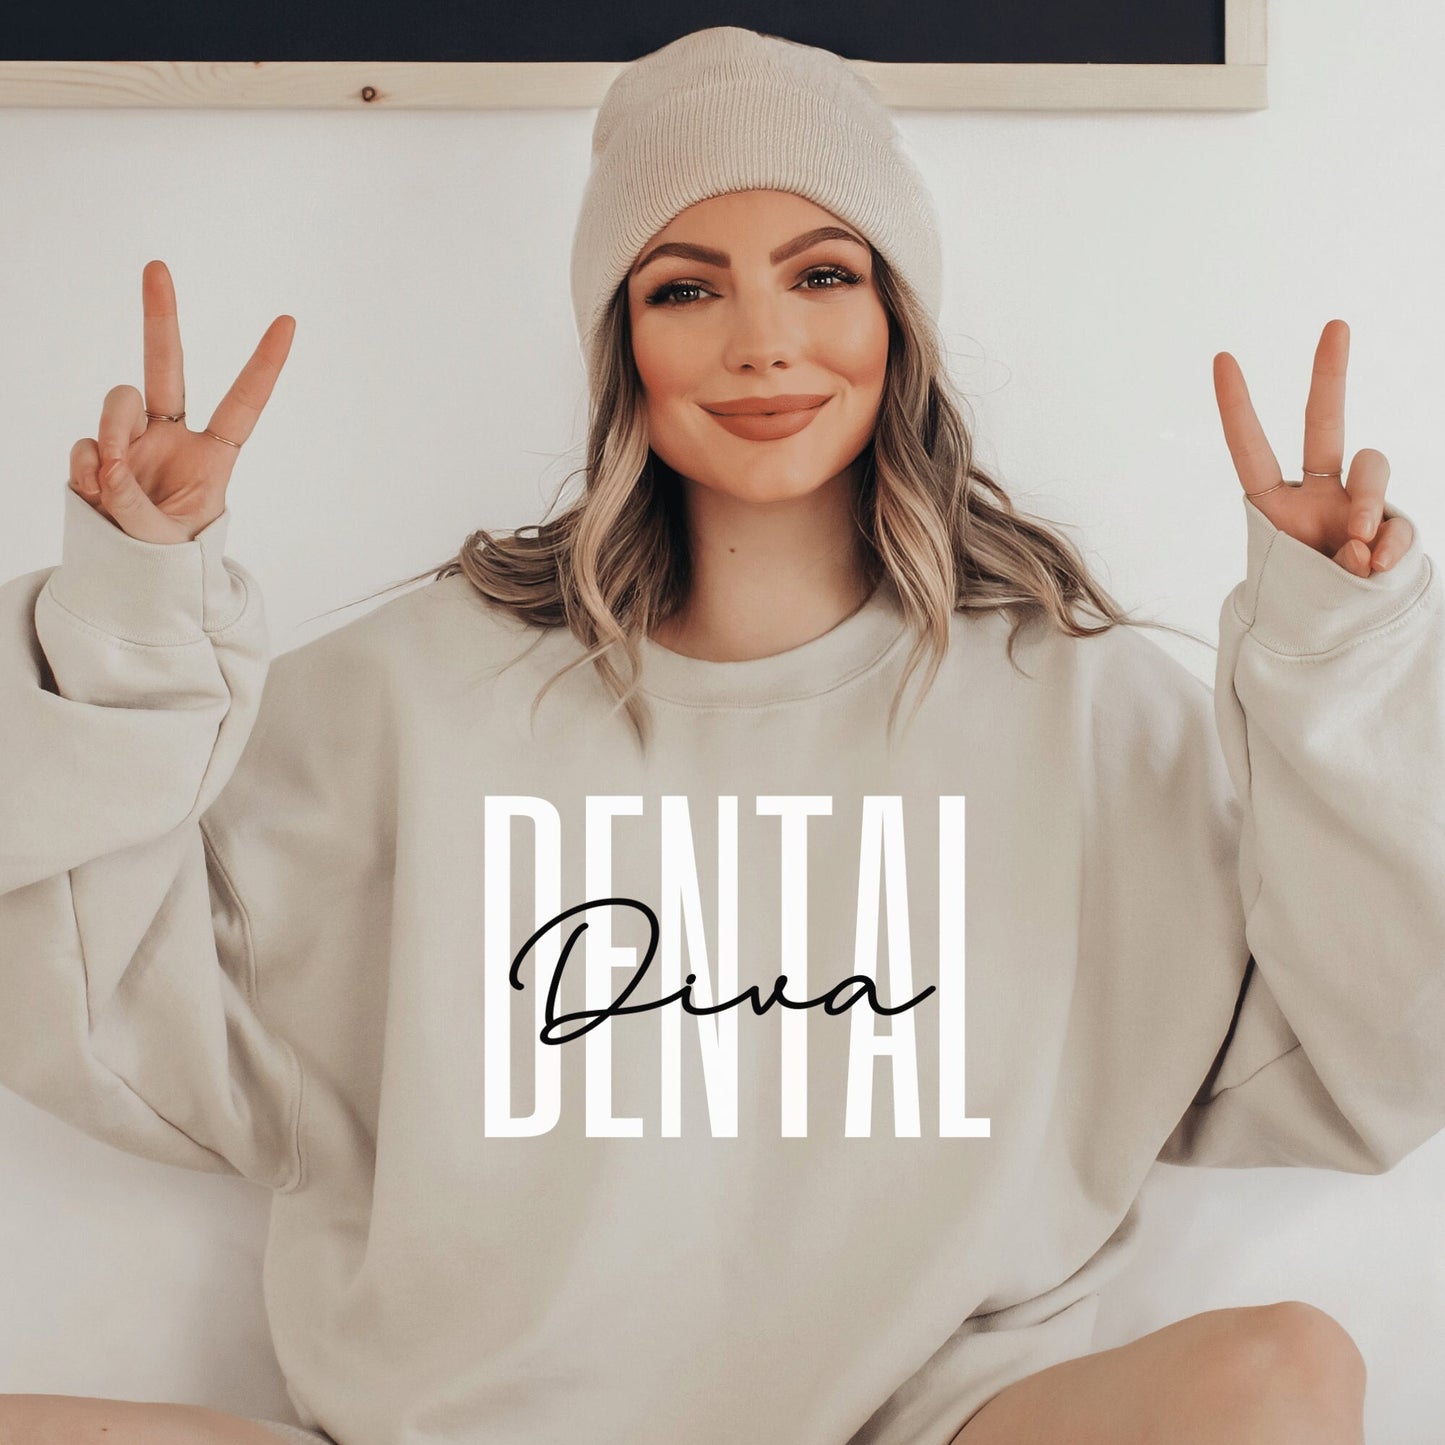 beige unisex dental hygienist sweatshirt that says dental in all white capital letters with the word diva in black script overlaying the word dental